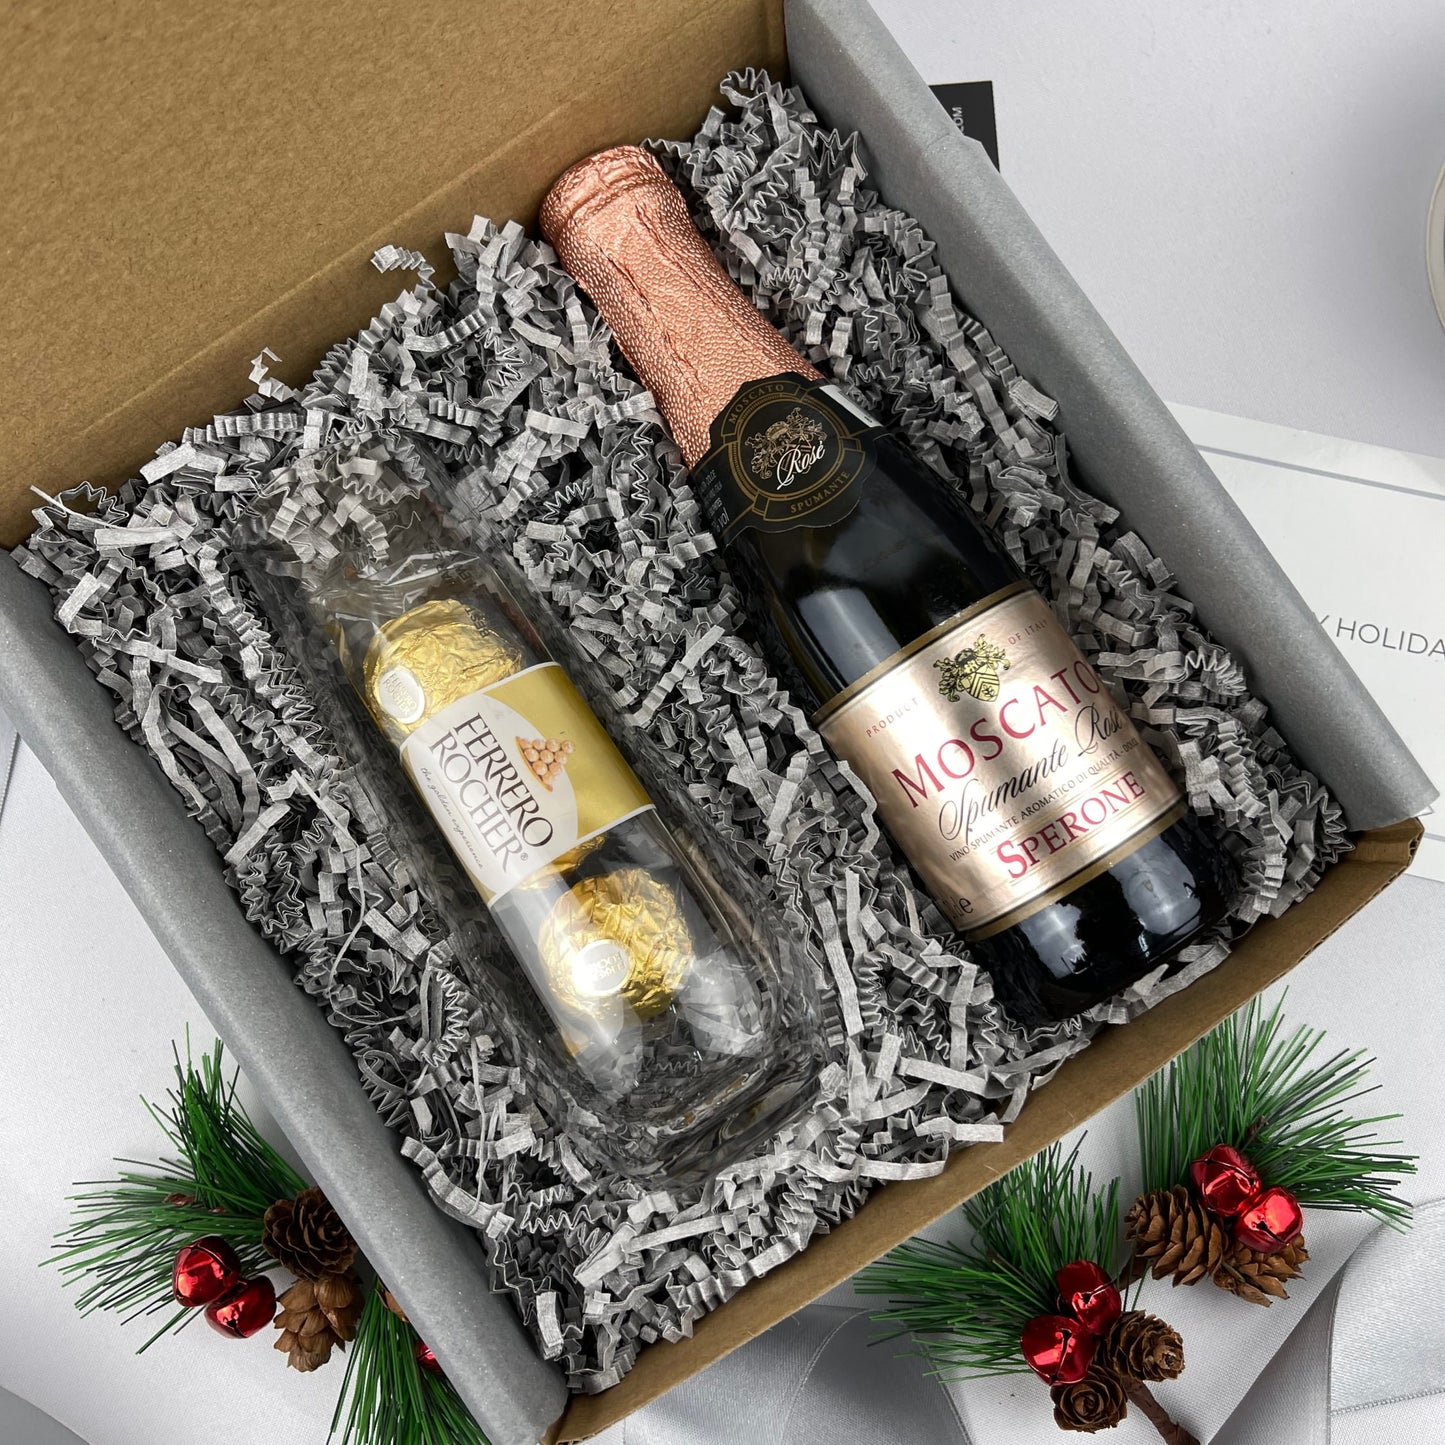 The 'Champagne Wishes' [Sperone Moscato] Gift Set